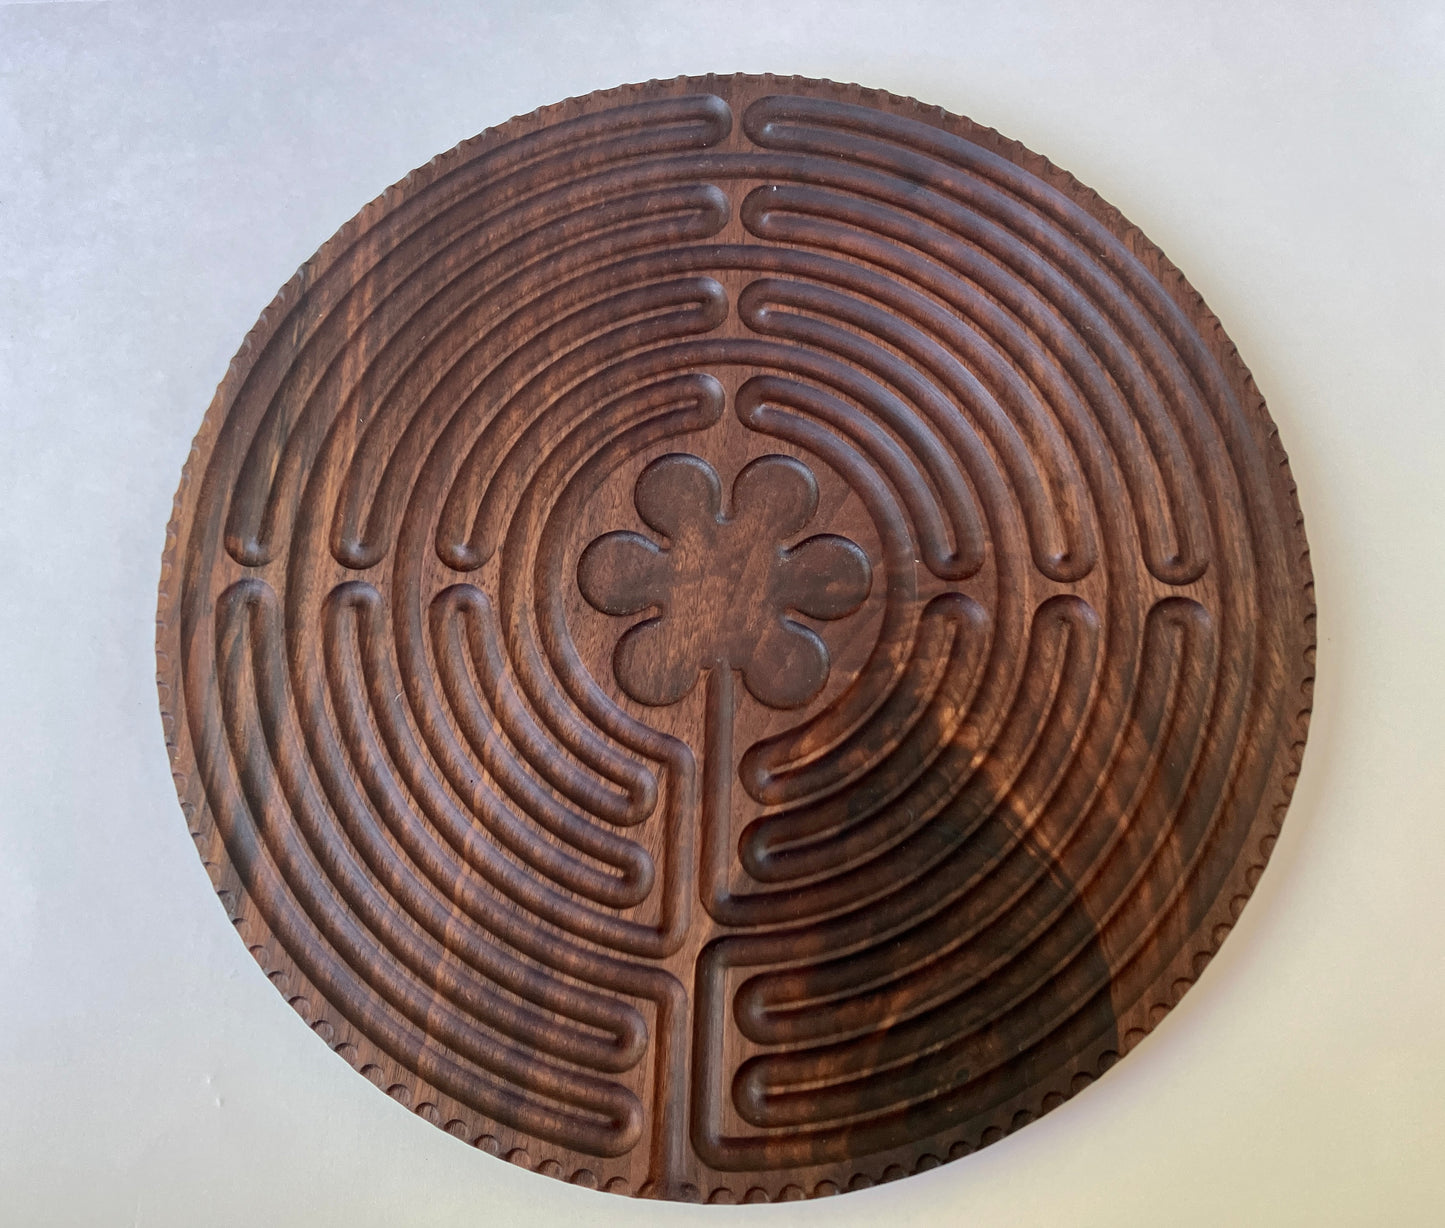 Extra Large 11-circuit Chartres-style Finger Labyrinth, Walnut Wood, 12" diameter